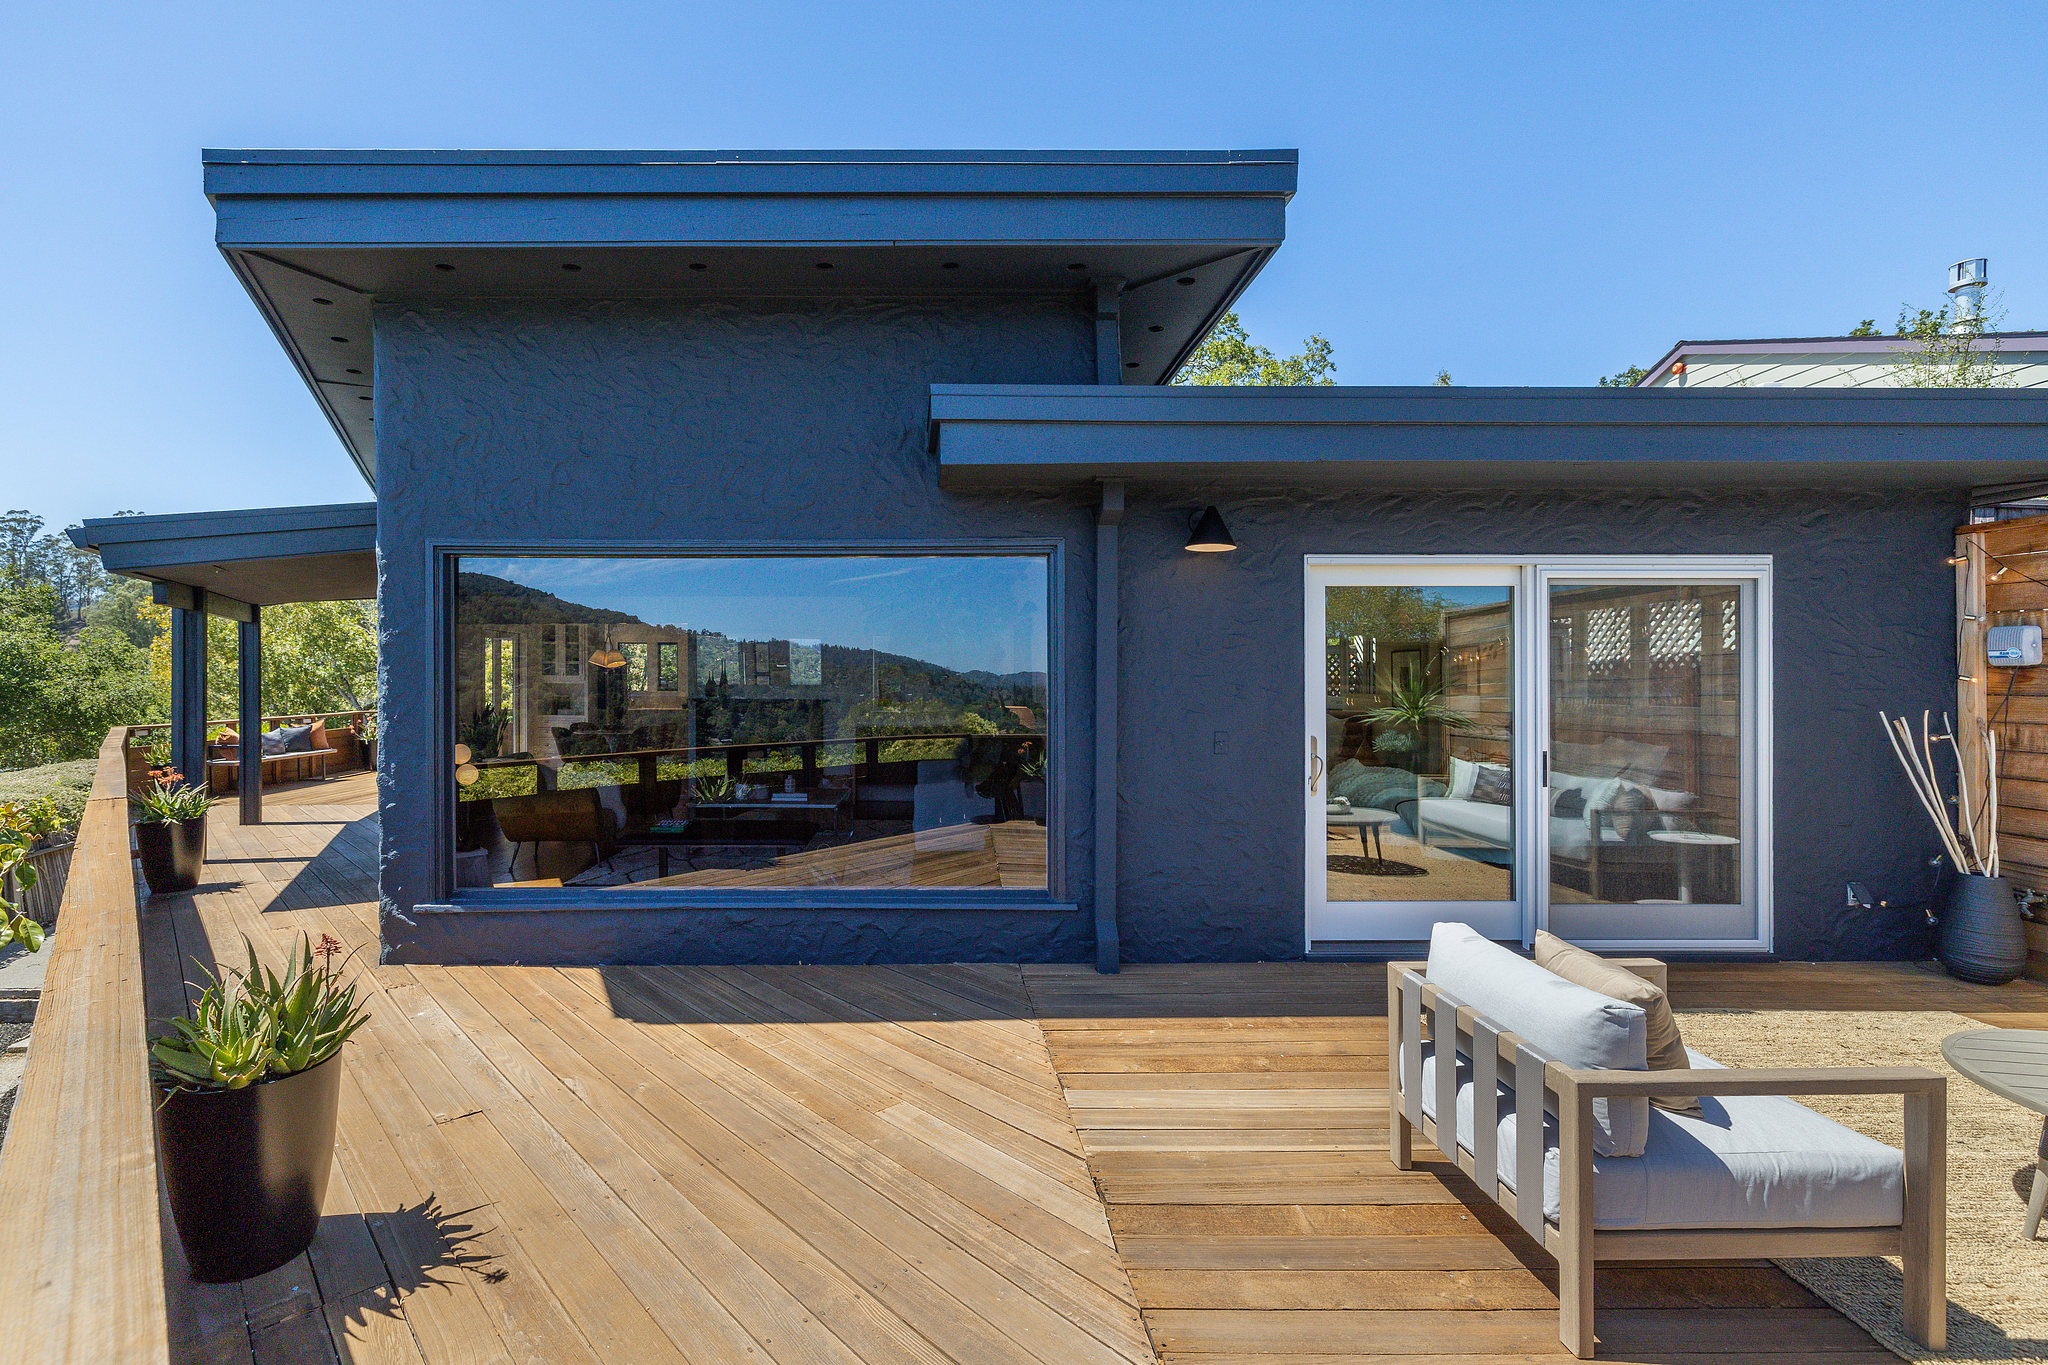 View of a home in Marin Country, listed by agent Chris Glave, showing a home with blue facade and a wrap around deck